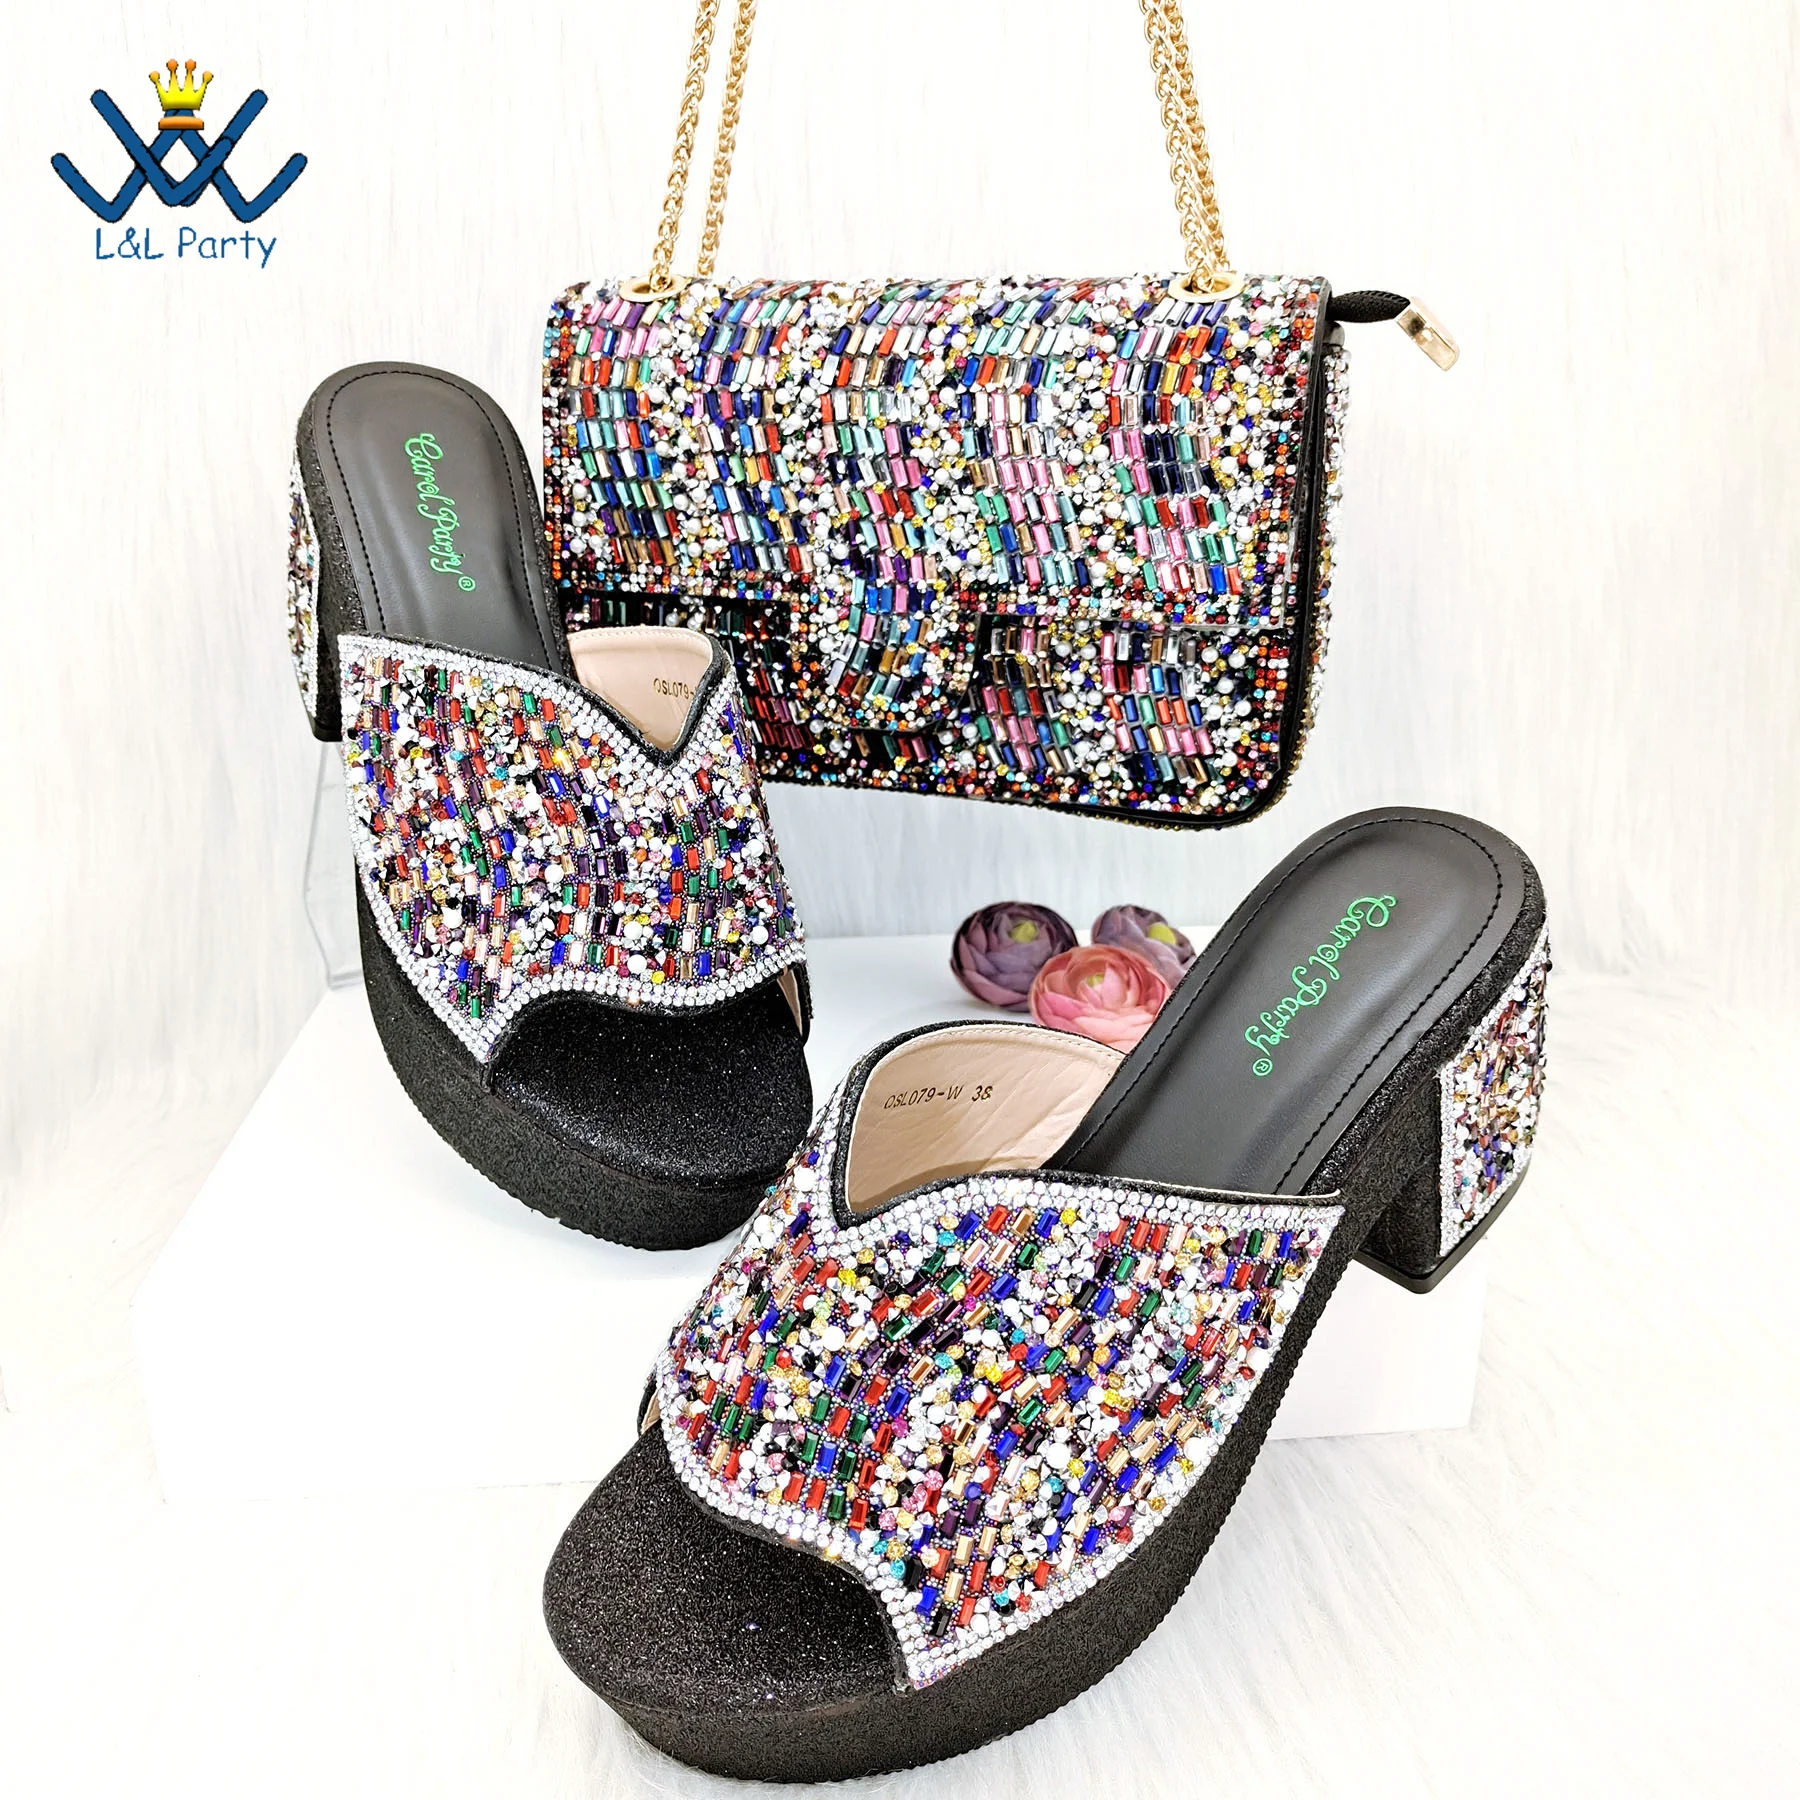 

New Shoes and Matching Bag for Nigeria Party Rainbow Color for Women Ladies Italian Shoes and Bag Set Decorated with Rhinestone